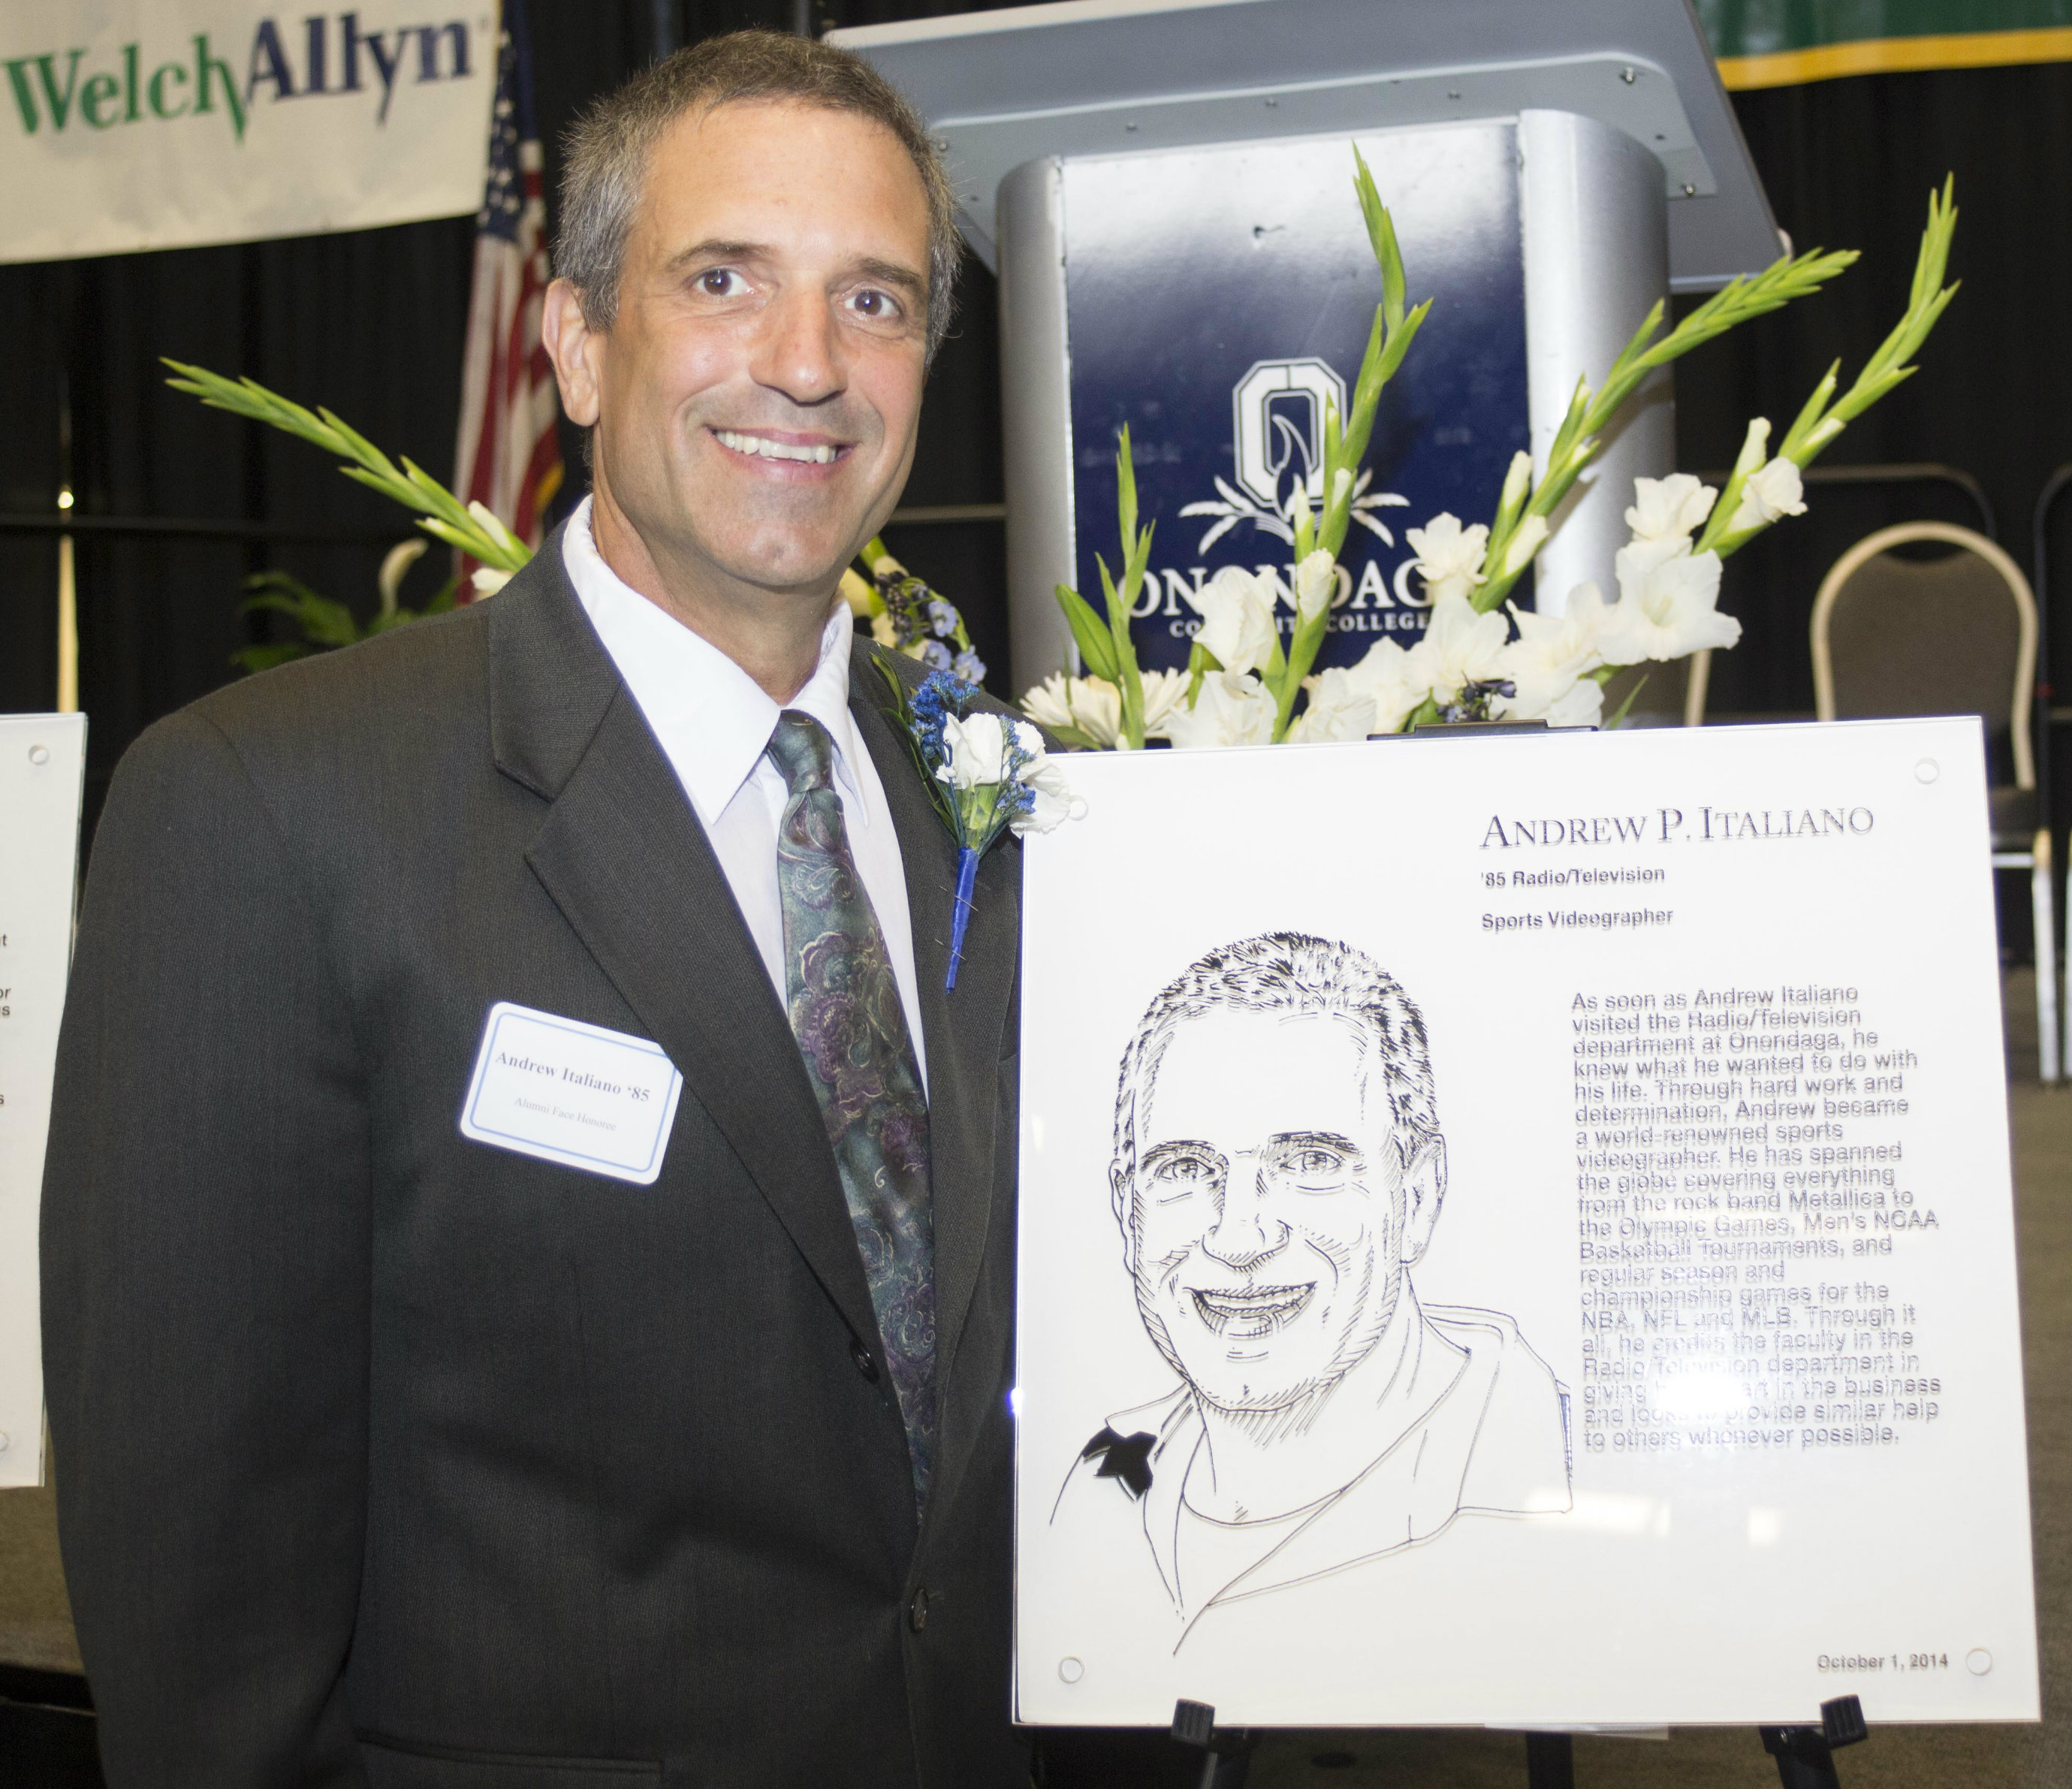 Italiano was named one of the College's Alumni Faces in 2014.